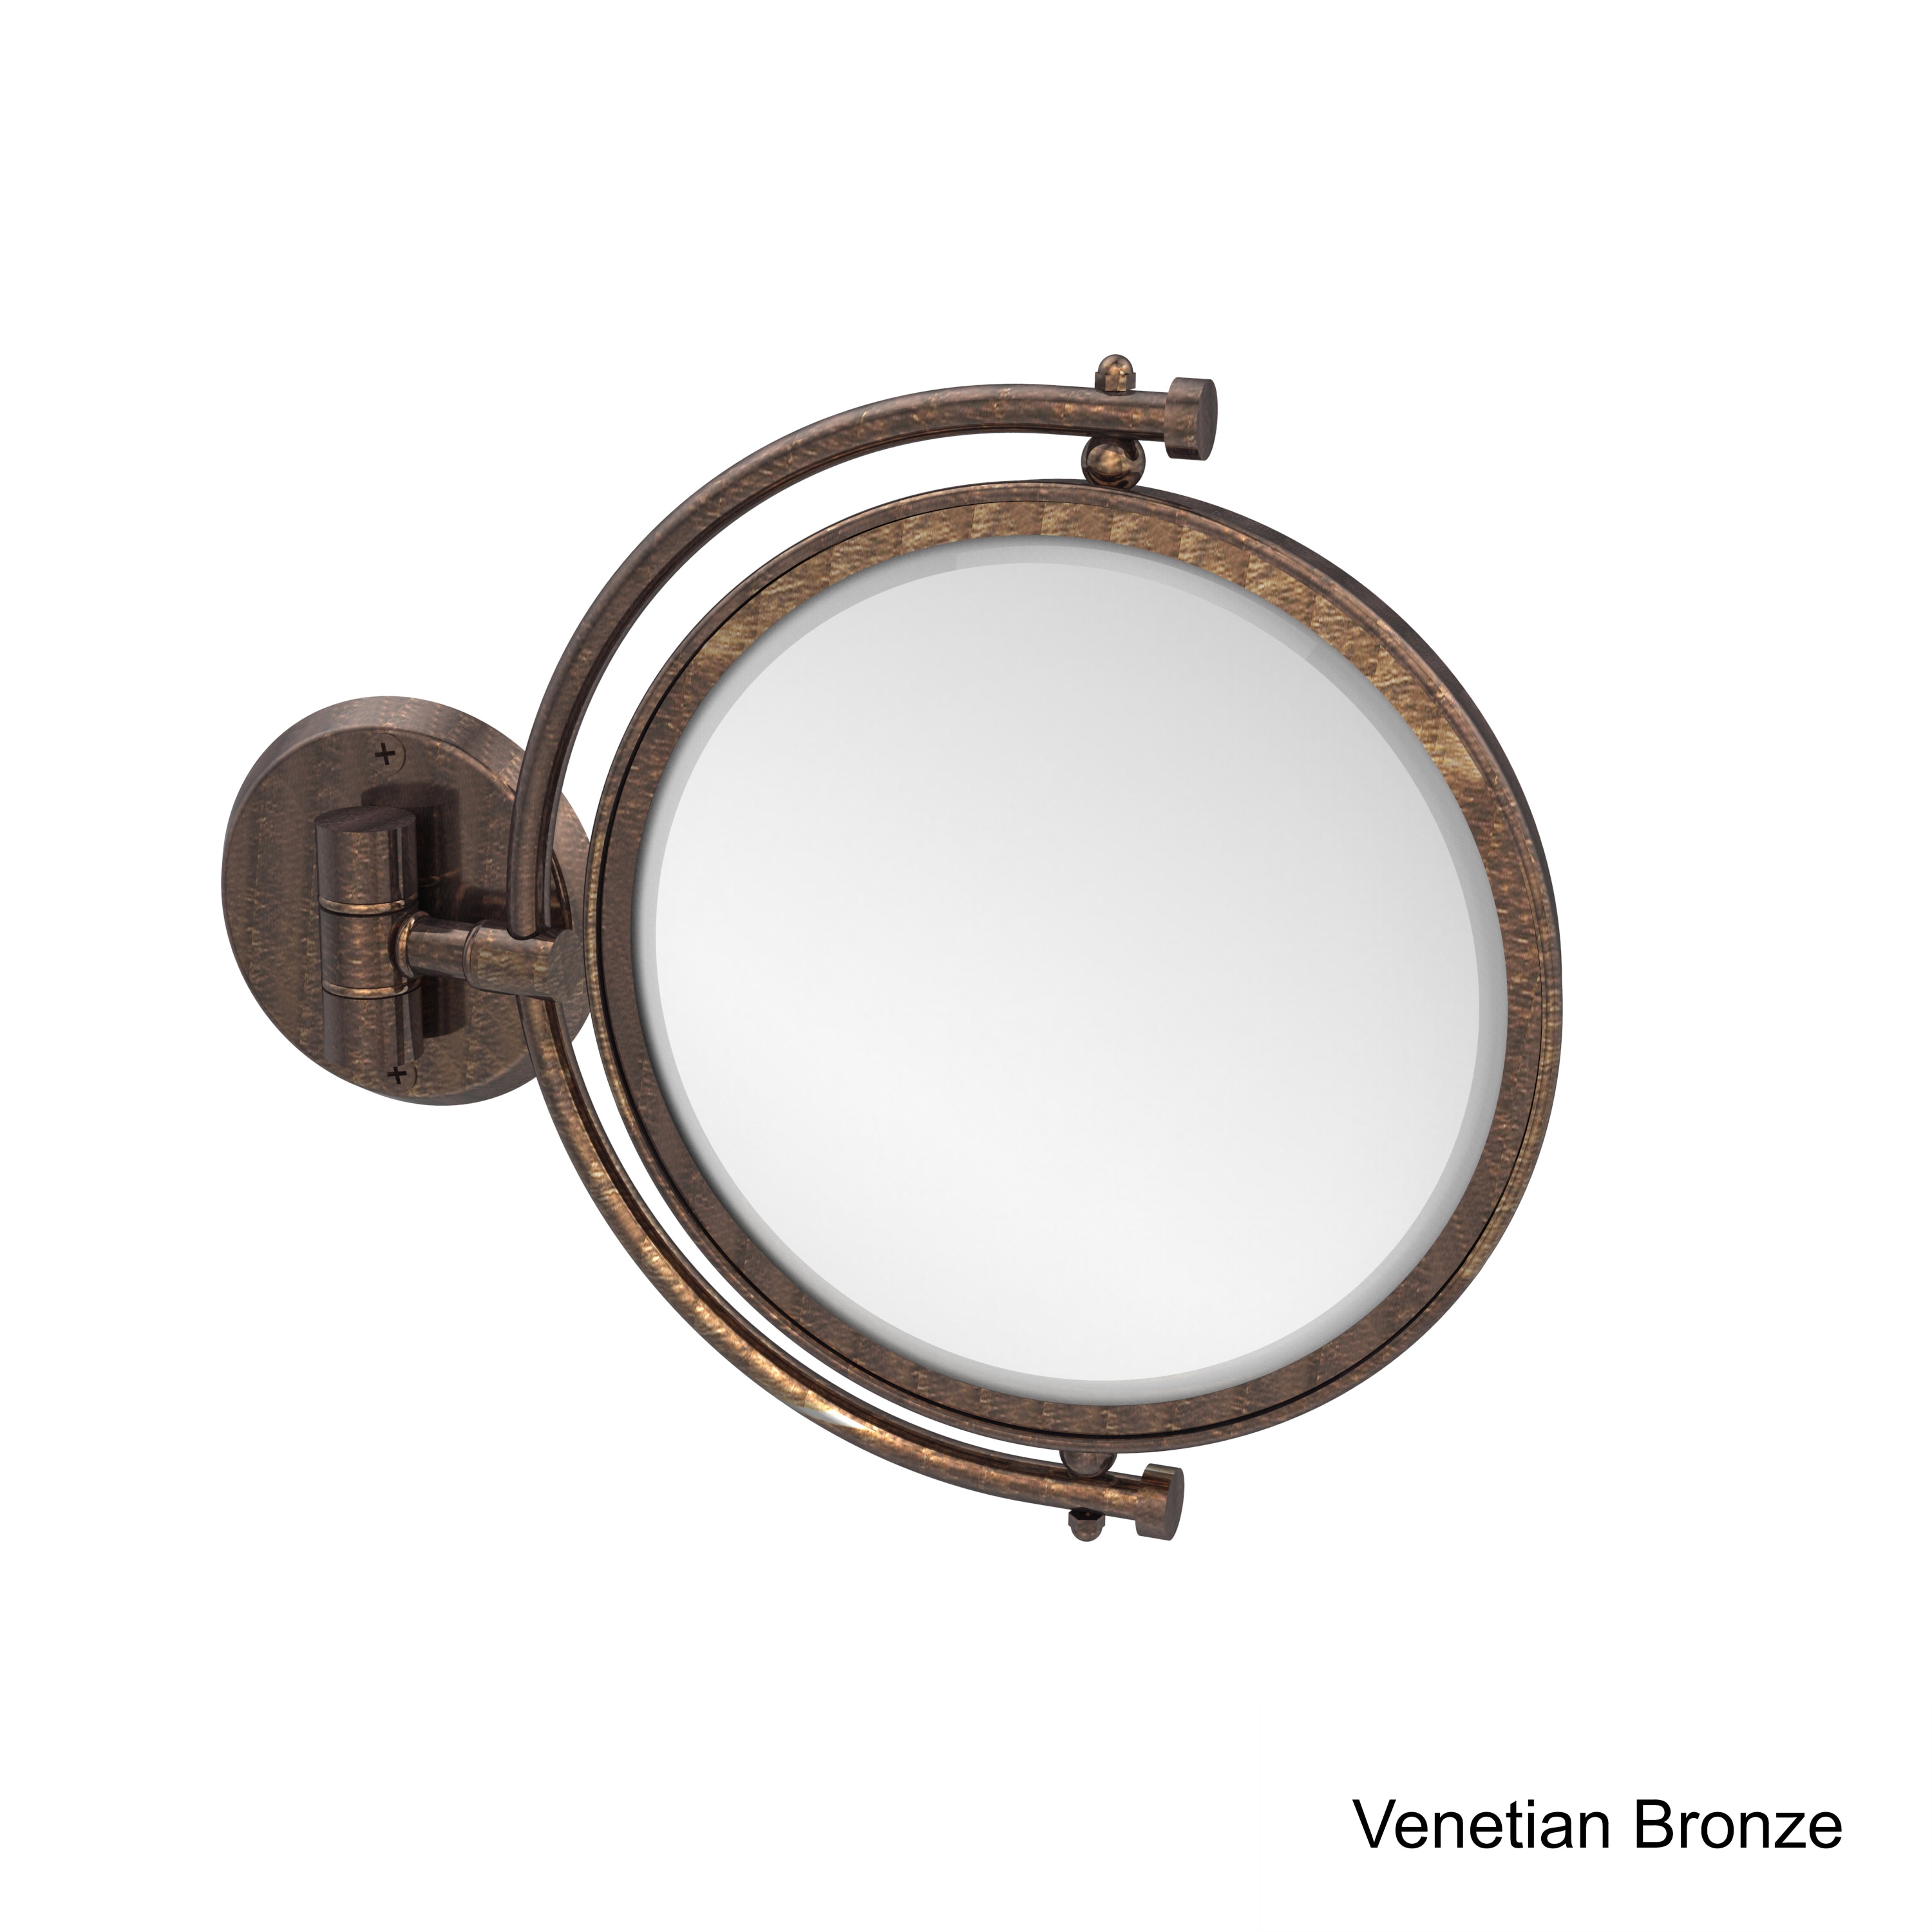 Allied Brass 8-inch Wall Mounted 4x Magnification Makeup Mirror Bed Bath   Beyond 12330378